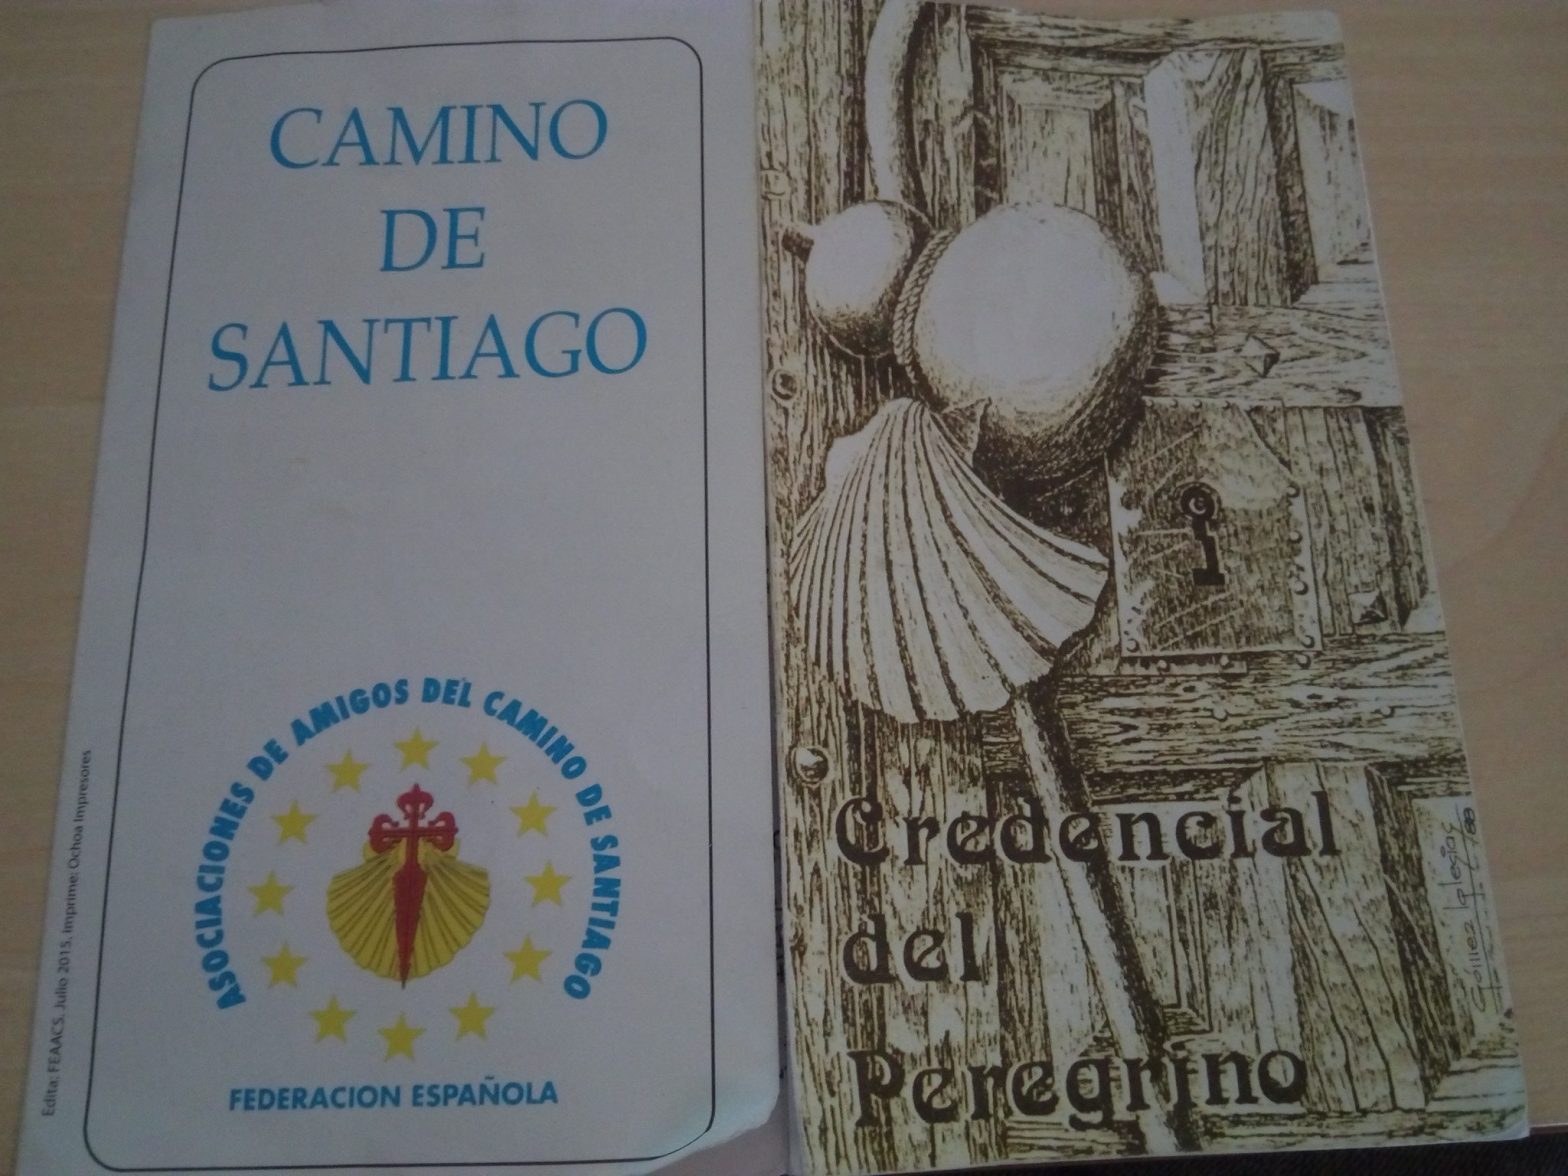 My Camino is over for now. I walked 255 km for ME/CFS